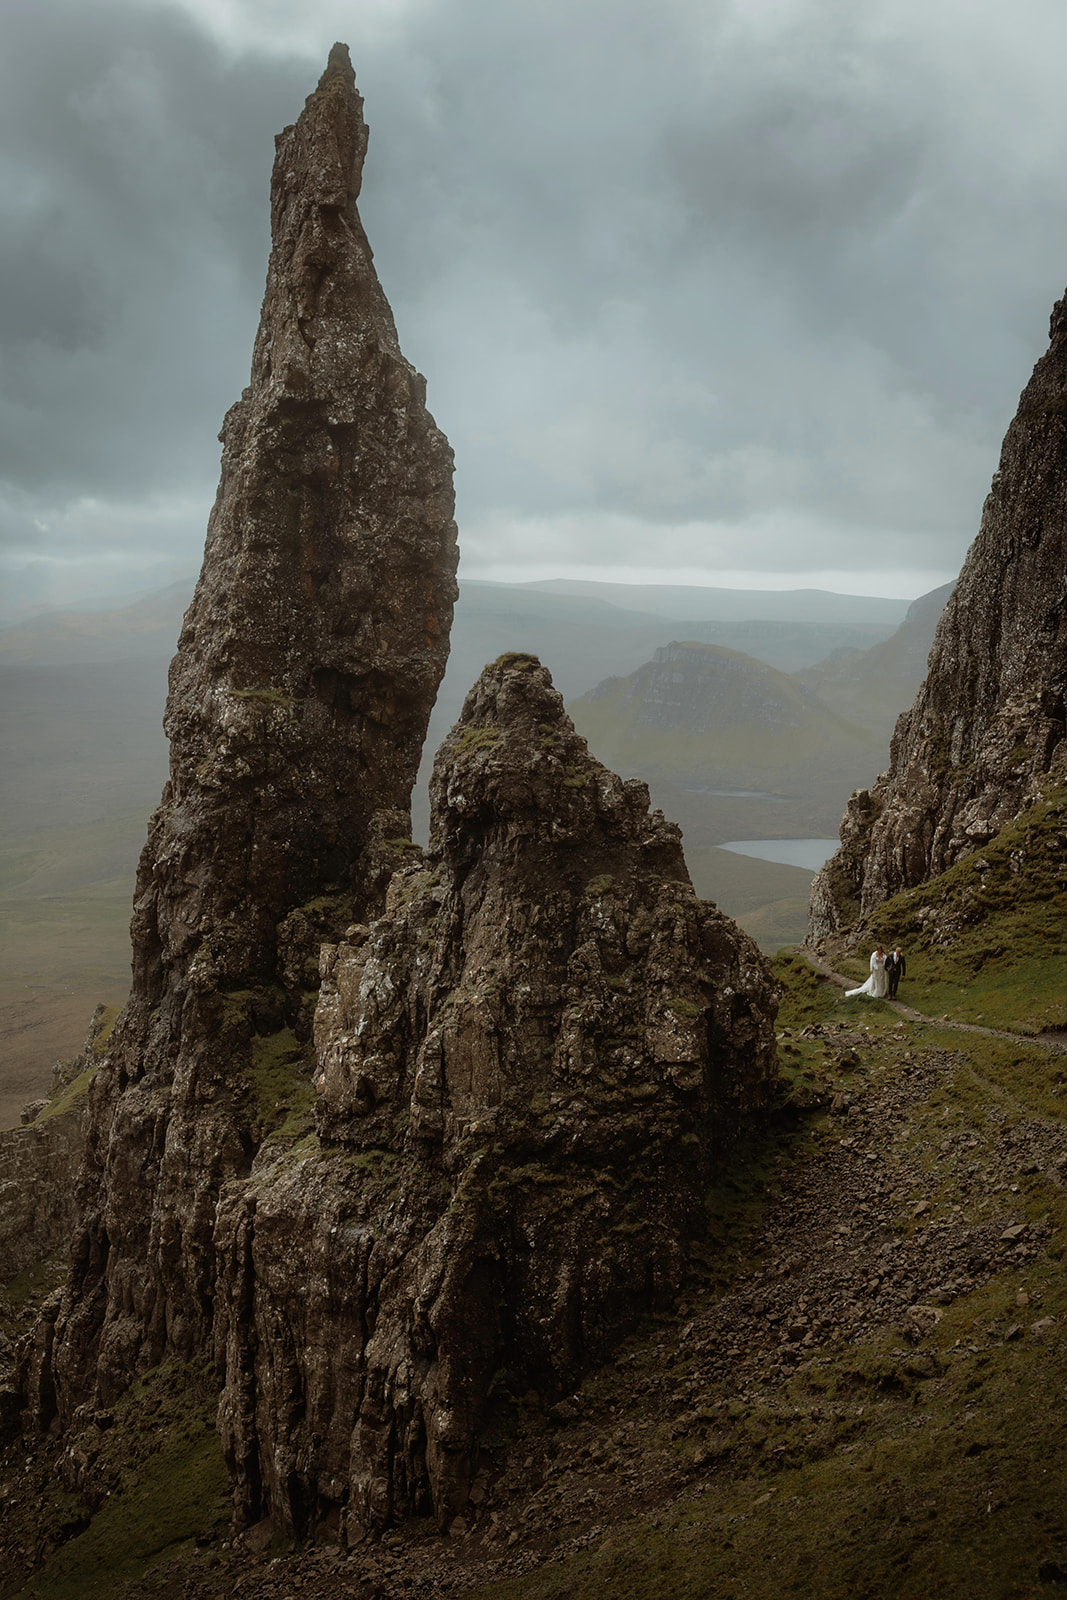 Elopement couple Emma and Matthew walking hand in hand along the path next to the Needle at the Quiraing, Isle of Skye